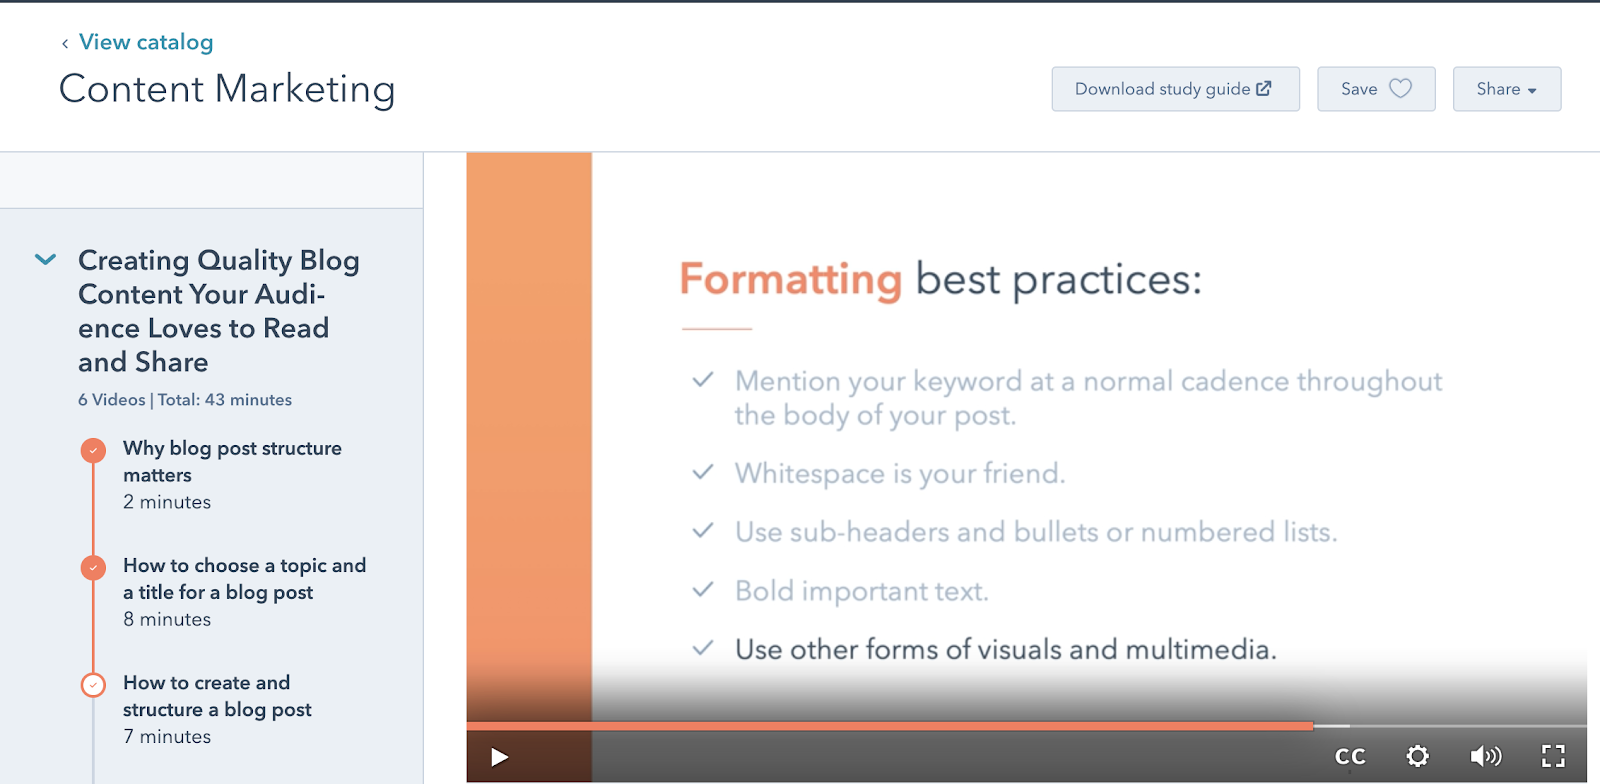 Hubspot's content marketing course formatting